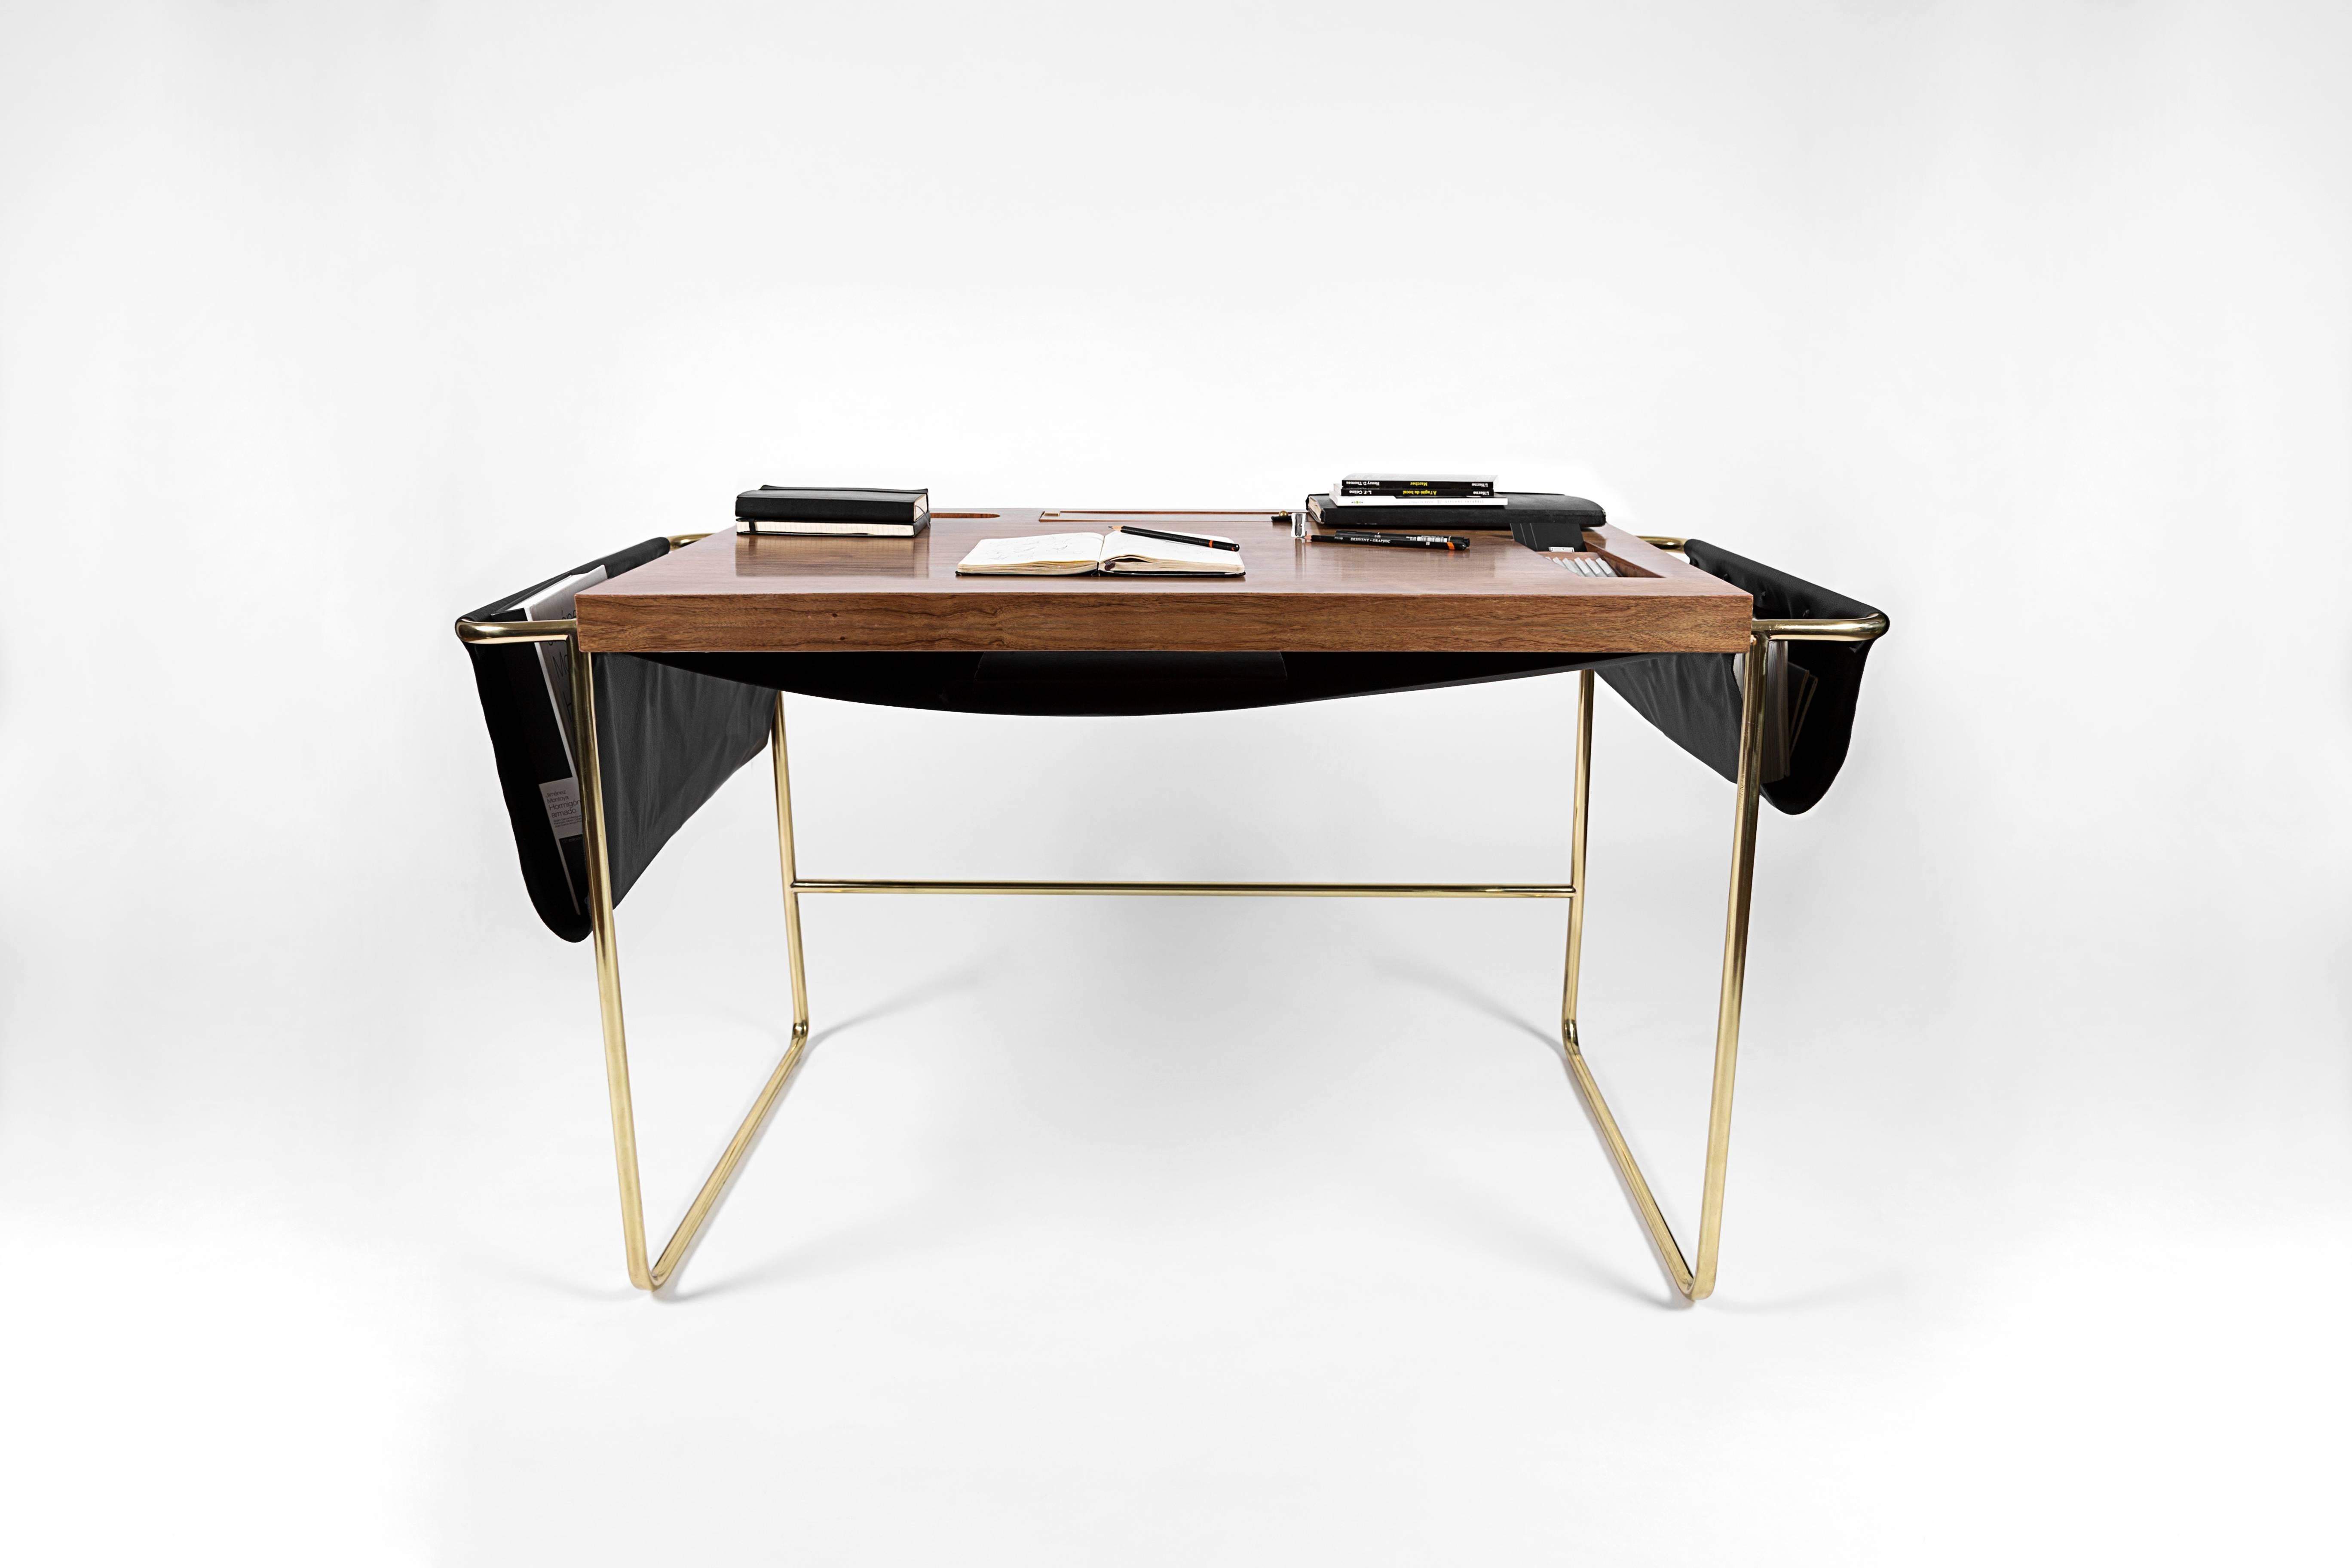 A striking balance between sharp edges and soft leather pocketing is found in the Casablanca desk by contemporary Nomade Atelier ´s Mexican design. Secret compartments for storing small treasures and chords. Walnut hardwood handcrafted tabletop,